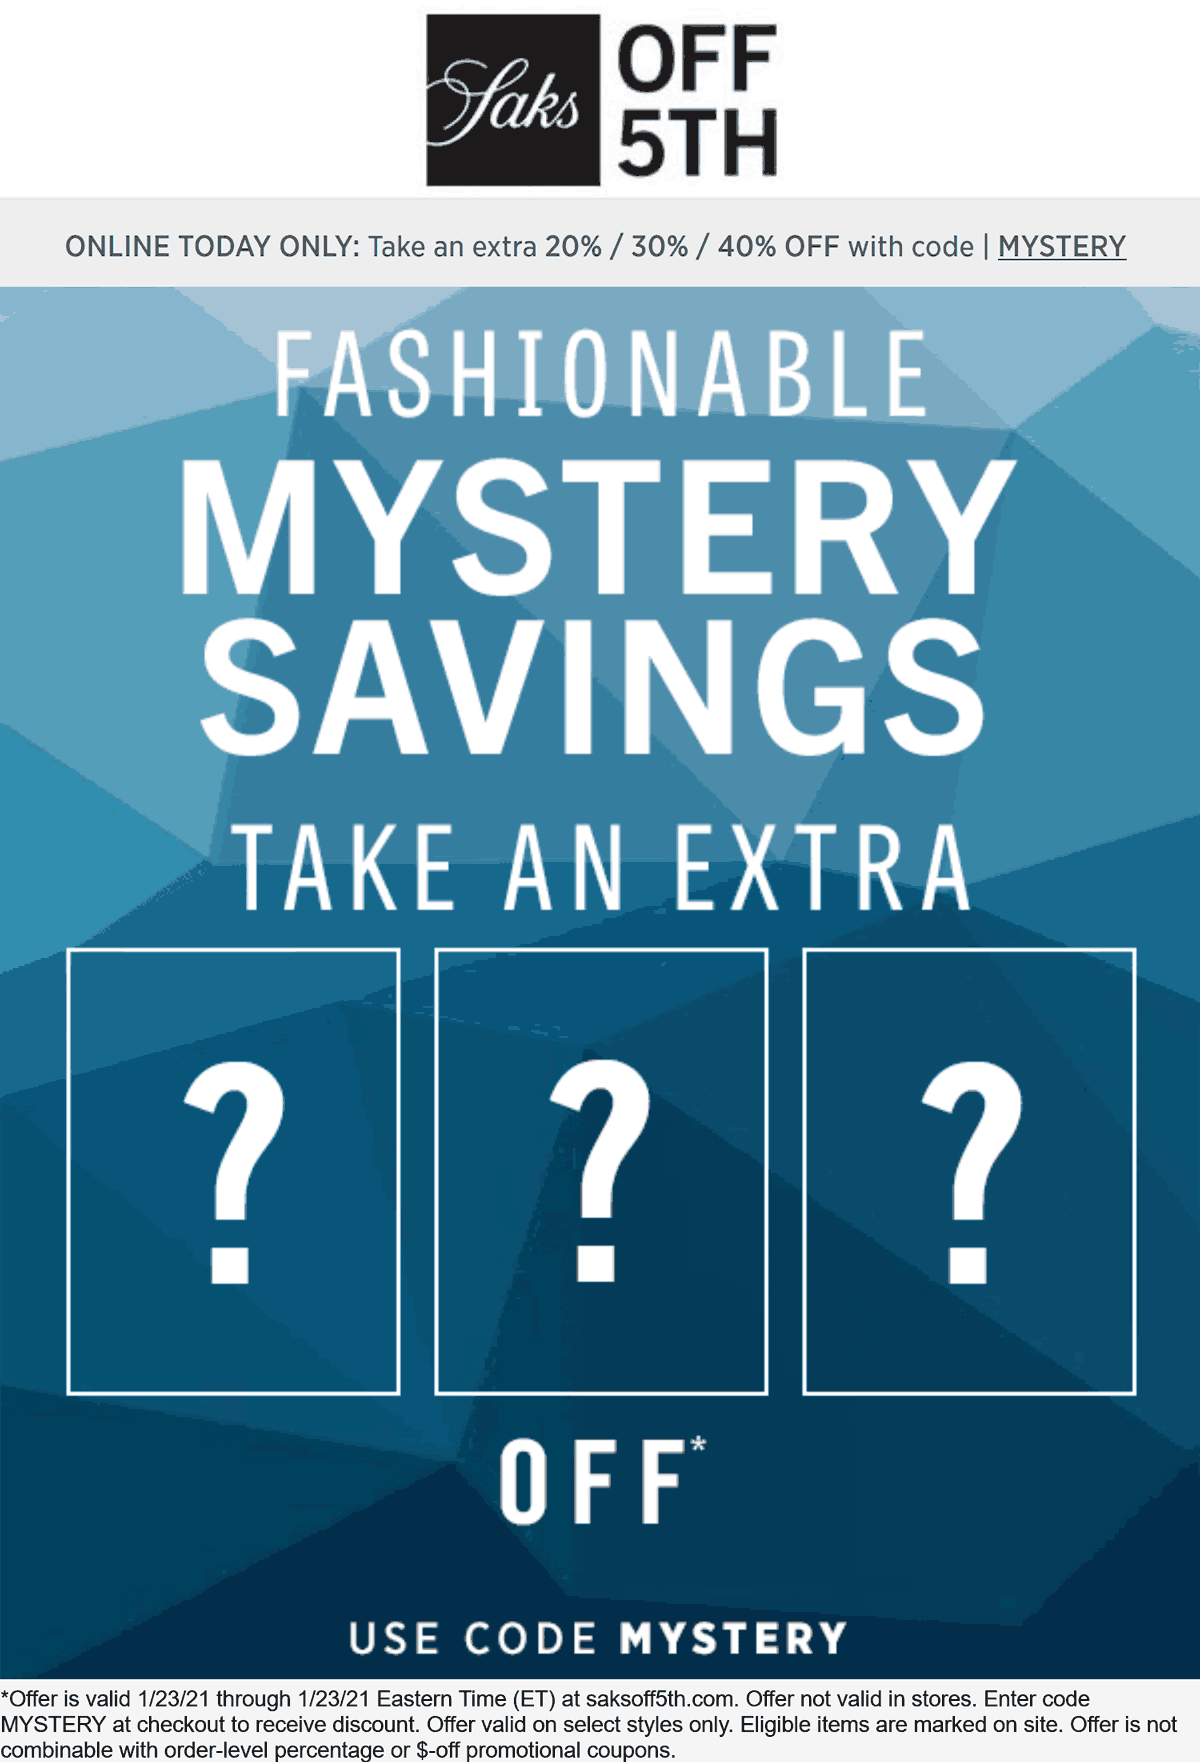 OFF 5TH stores Coupon  Extra 20-40% off online today at Saks OFF 5TH via promo code MYSTERY #off5th 